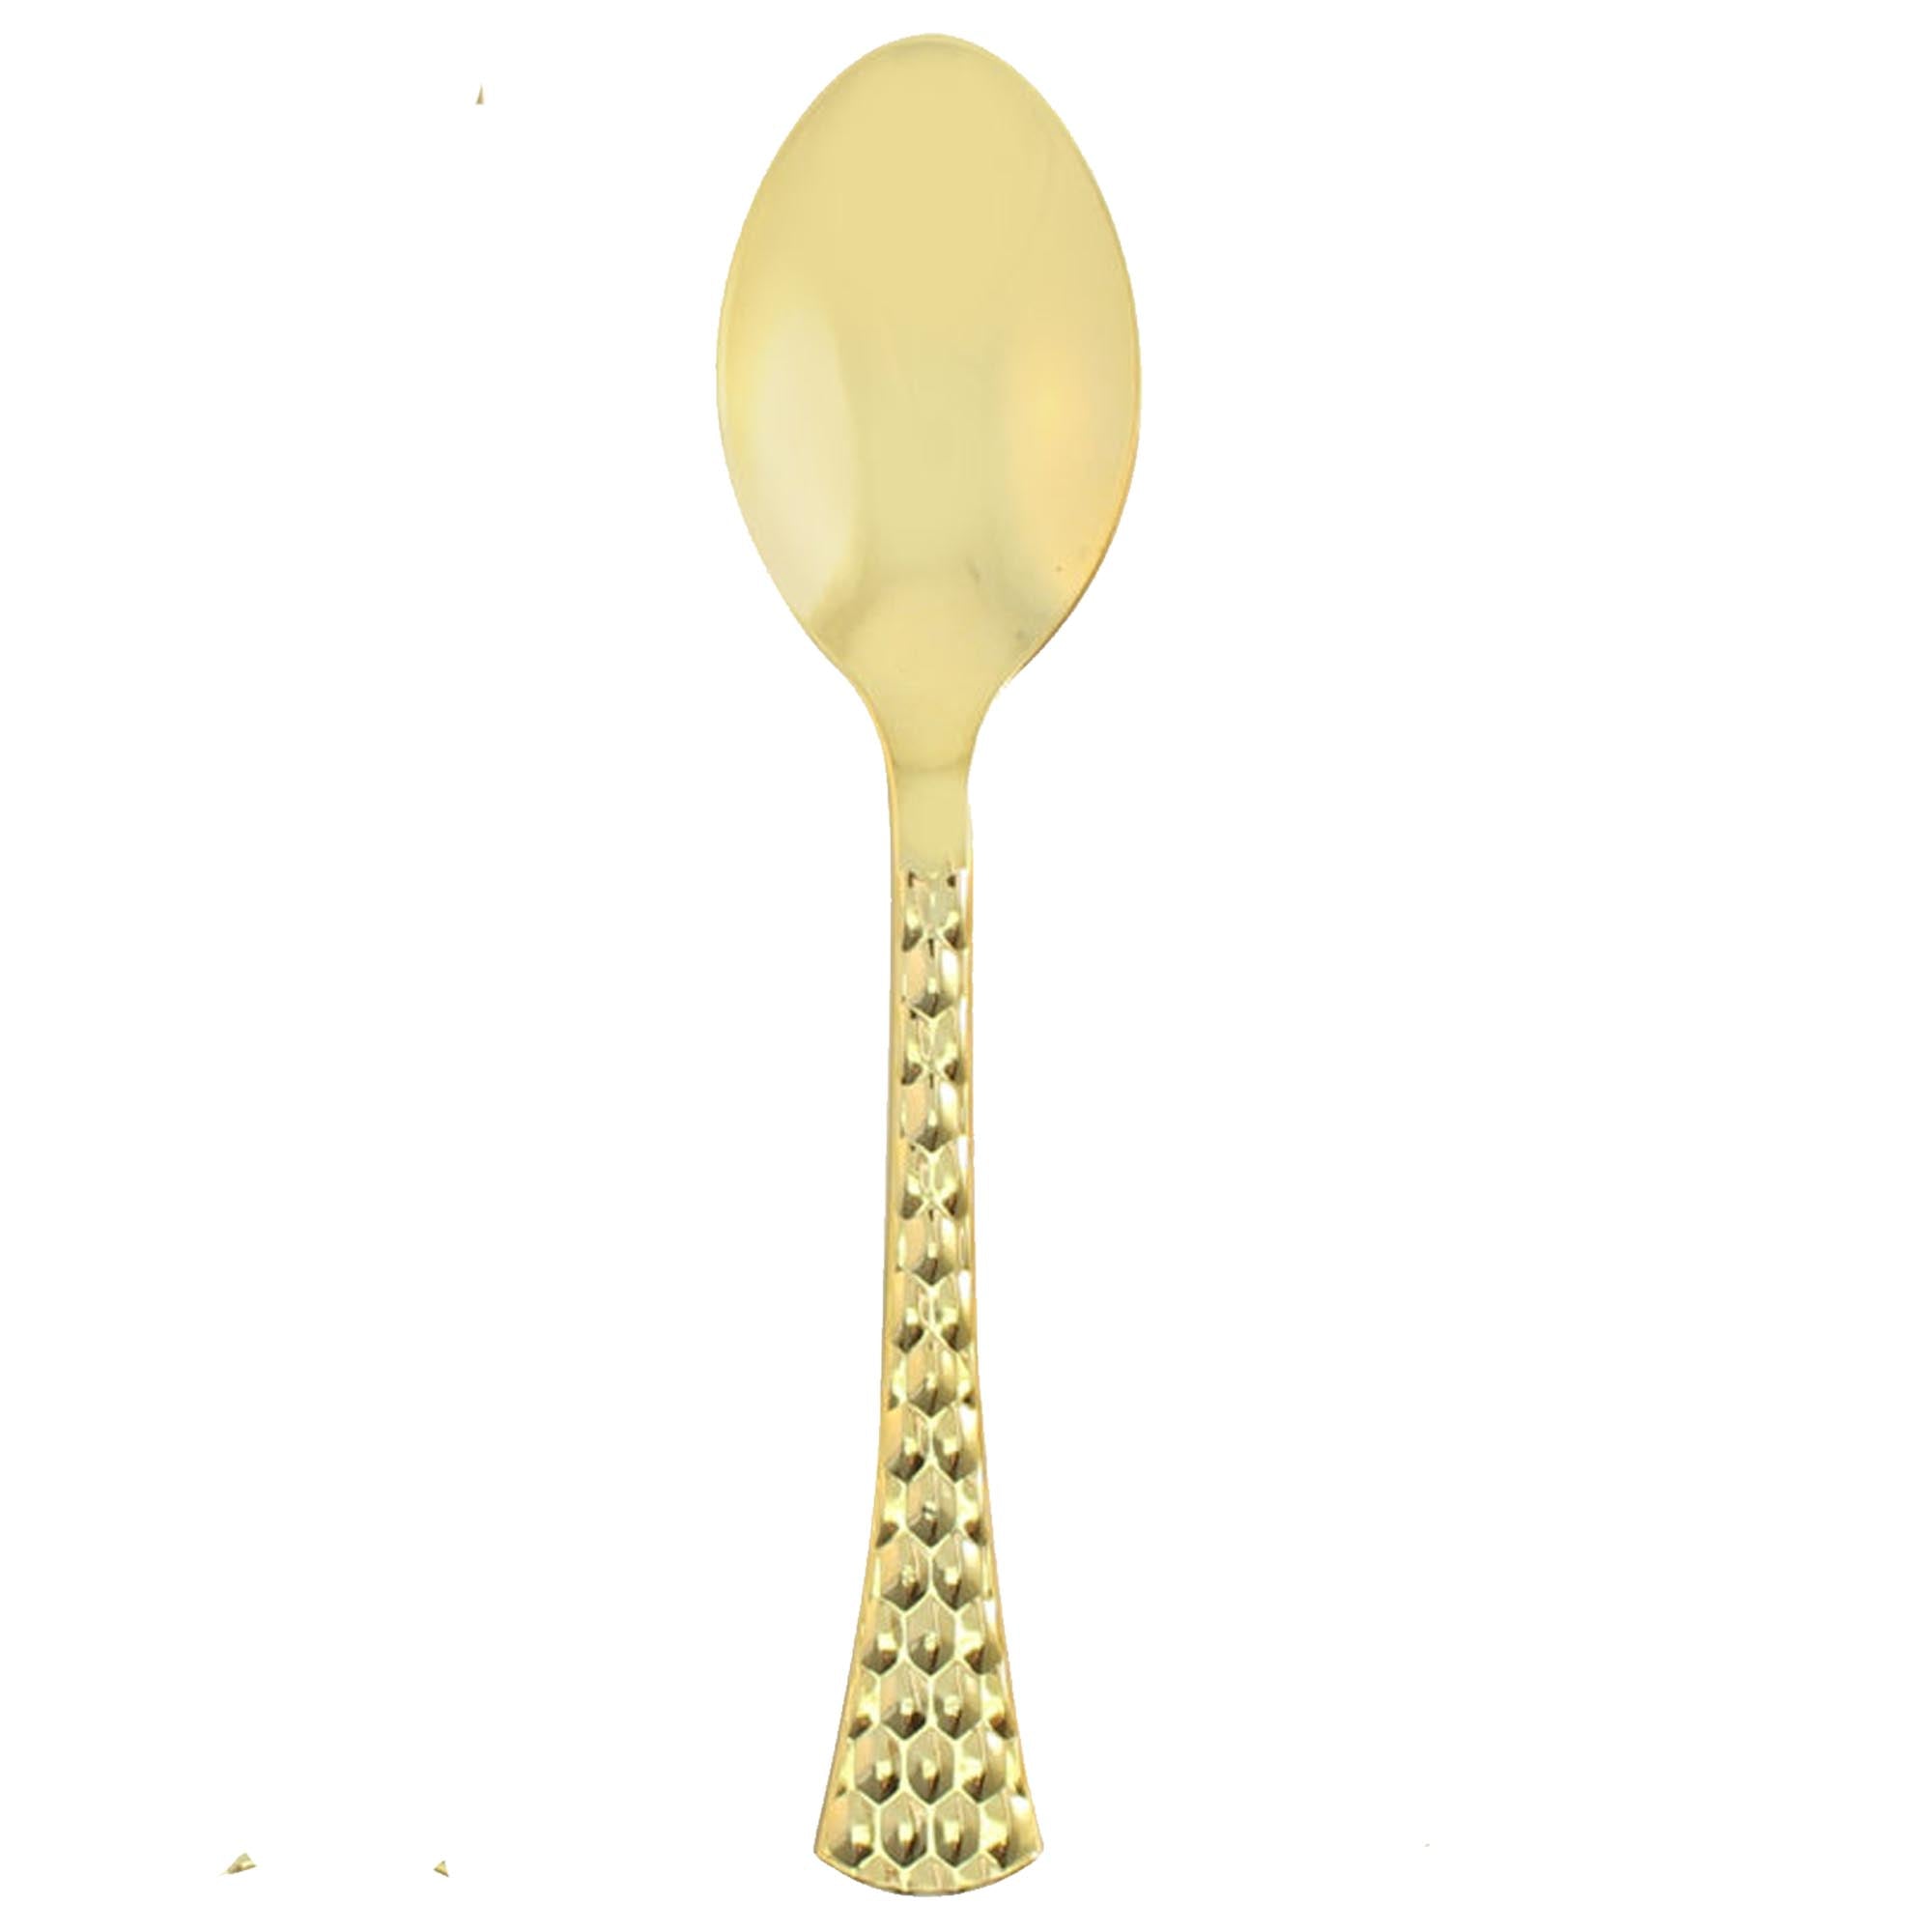 Plastic Party soup spoon Household Supplies Disposable Plastic soup spoon Bbq soup spoon fancy disposable soup spoon heavy duty soup spoon classic elegant sturdy soup spoon reusable wedding dinner salad dessert soup spoon catering high quality birthday anniversary soup spoon